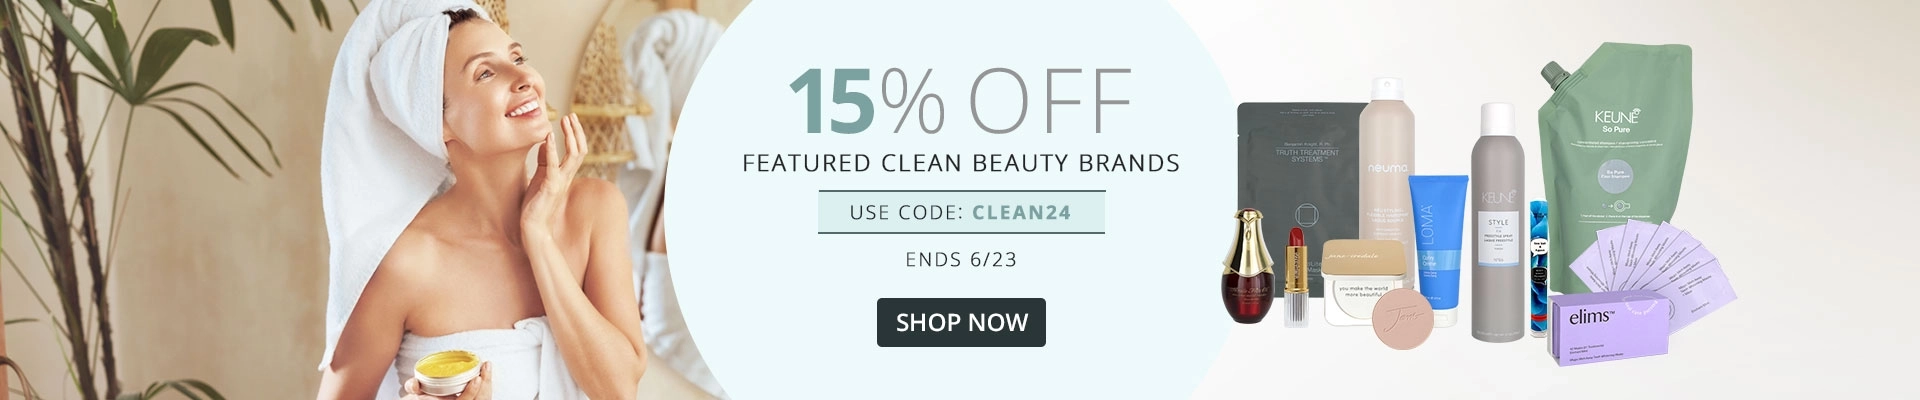 15% Off on Clean Beauty Brands | Use Code: CLEAN24 - Ends 6/23 | Shop Now